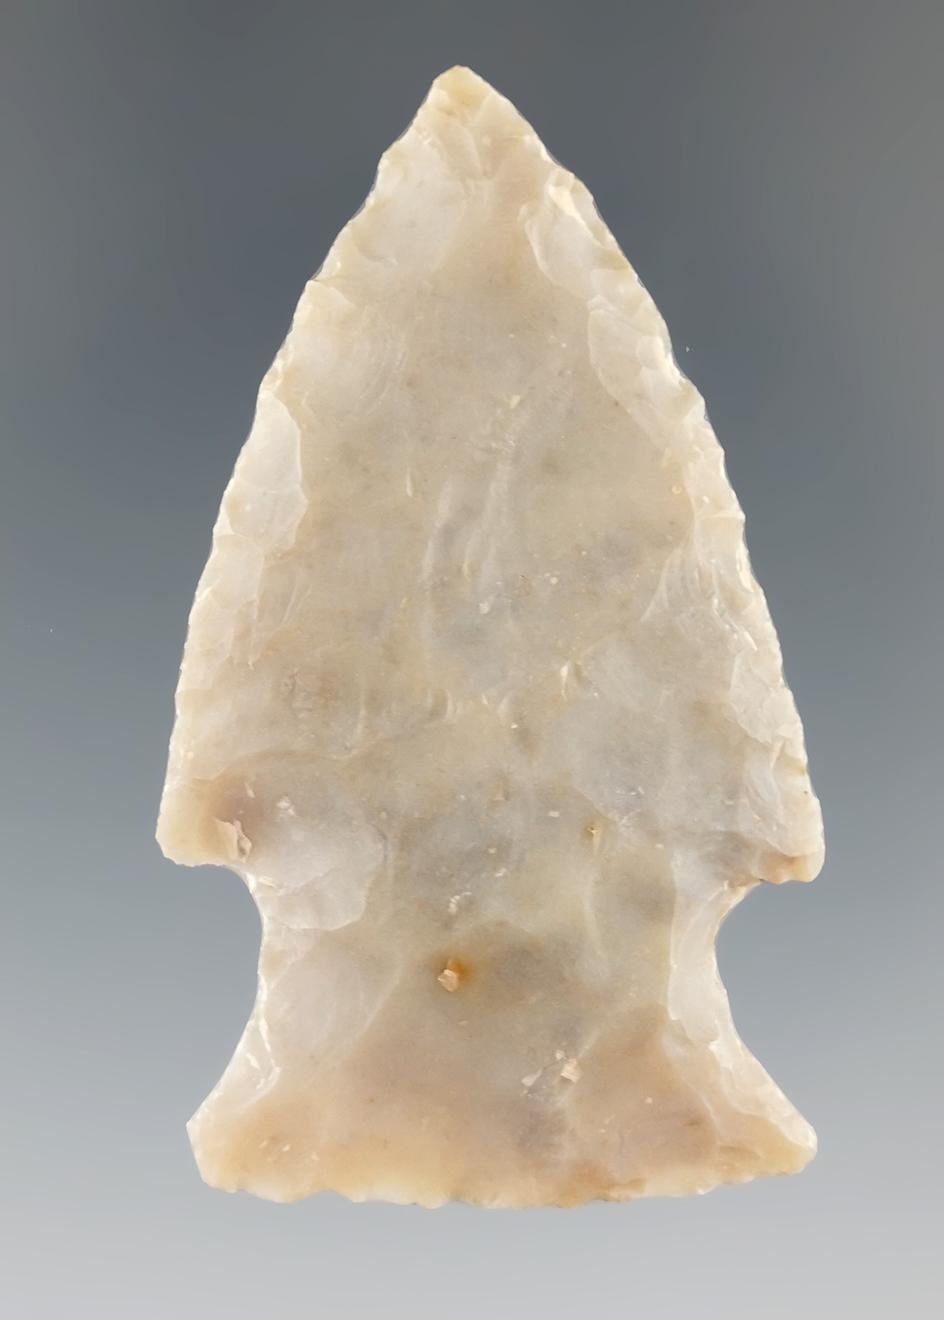 2 3/16" Hopewell made from translucent Flint Ridge Flint. Found in Holmes Co., Ohio.